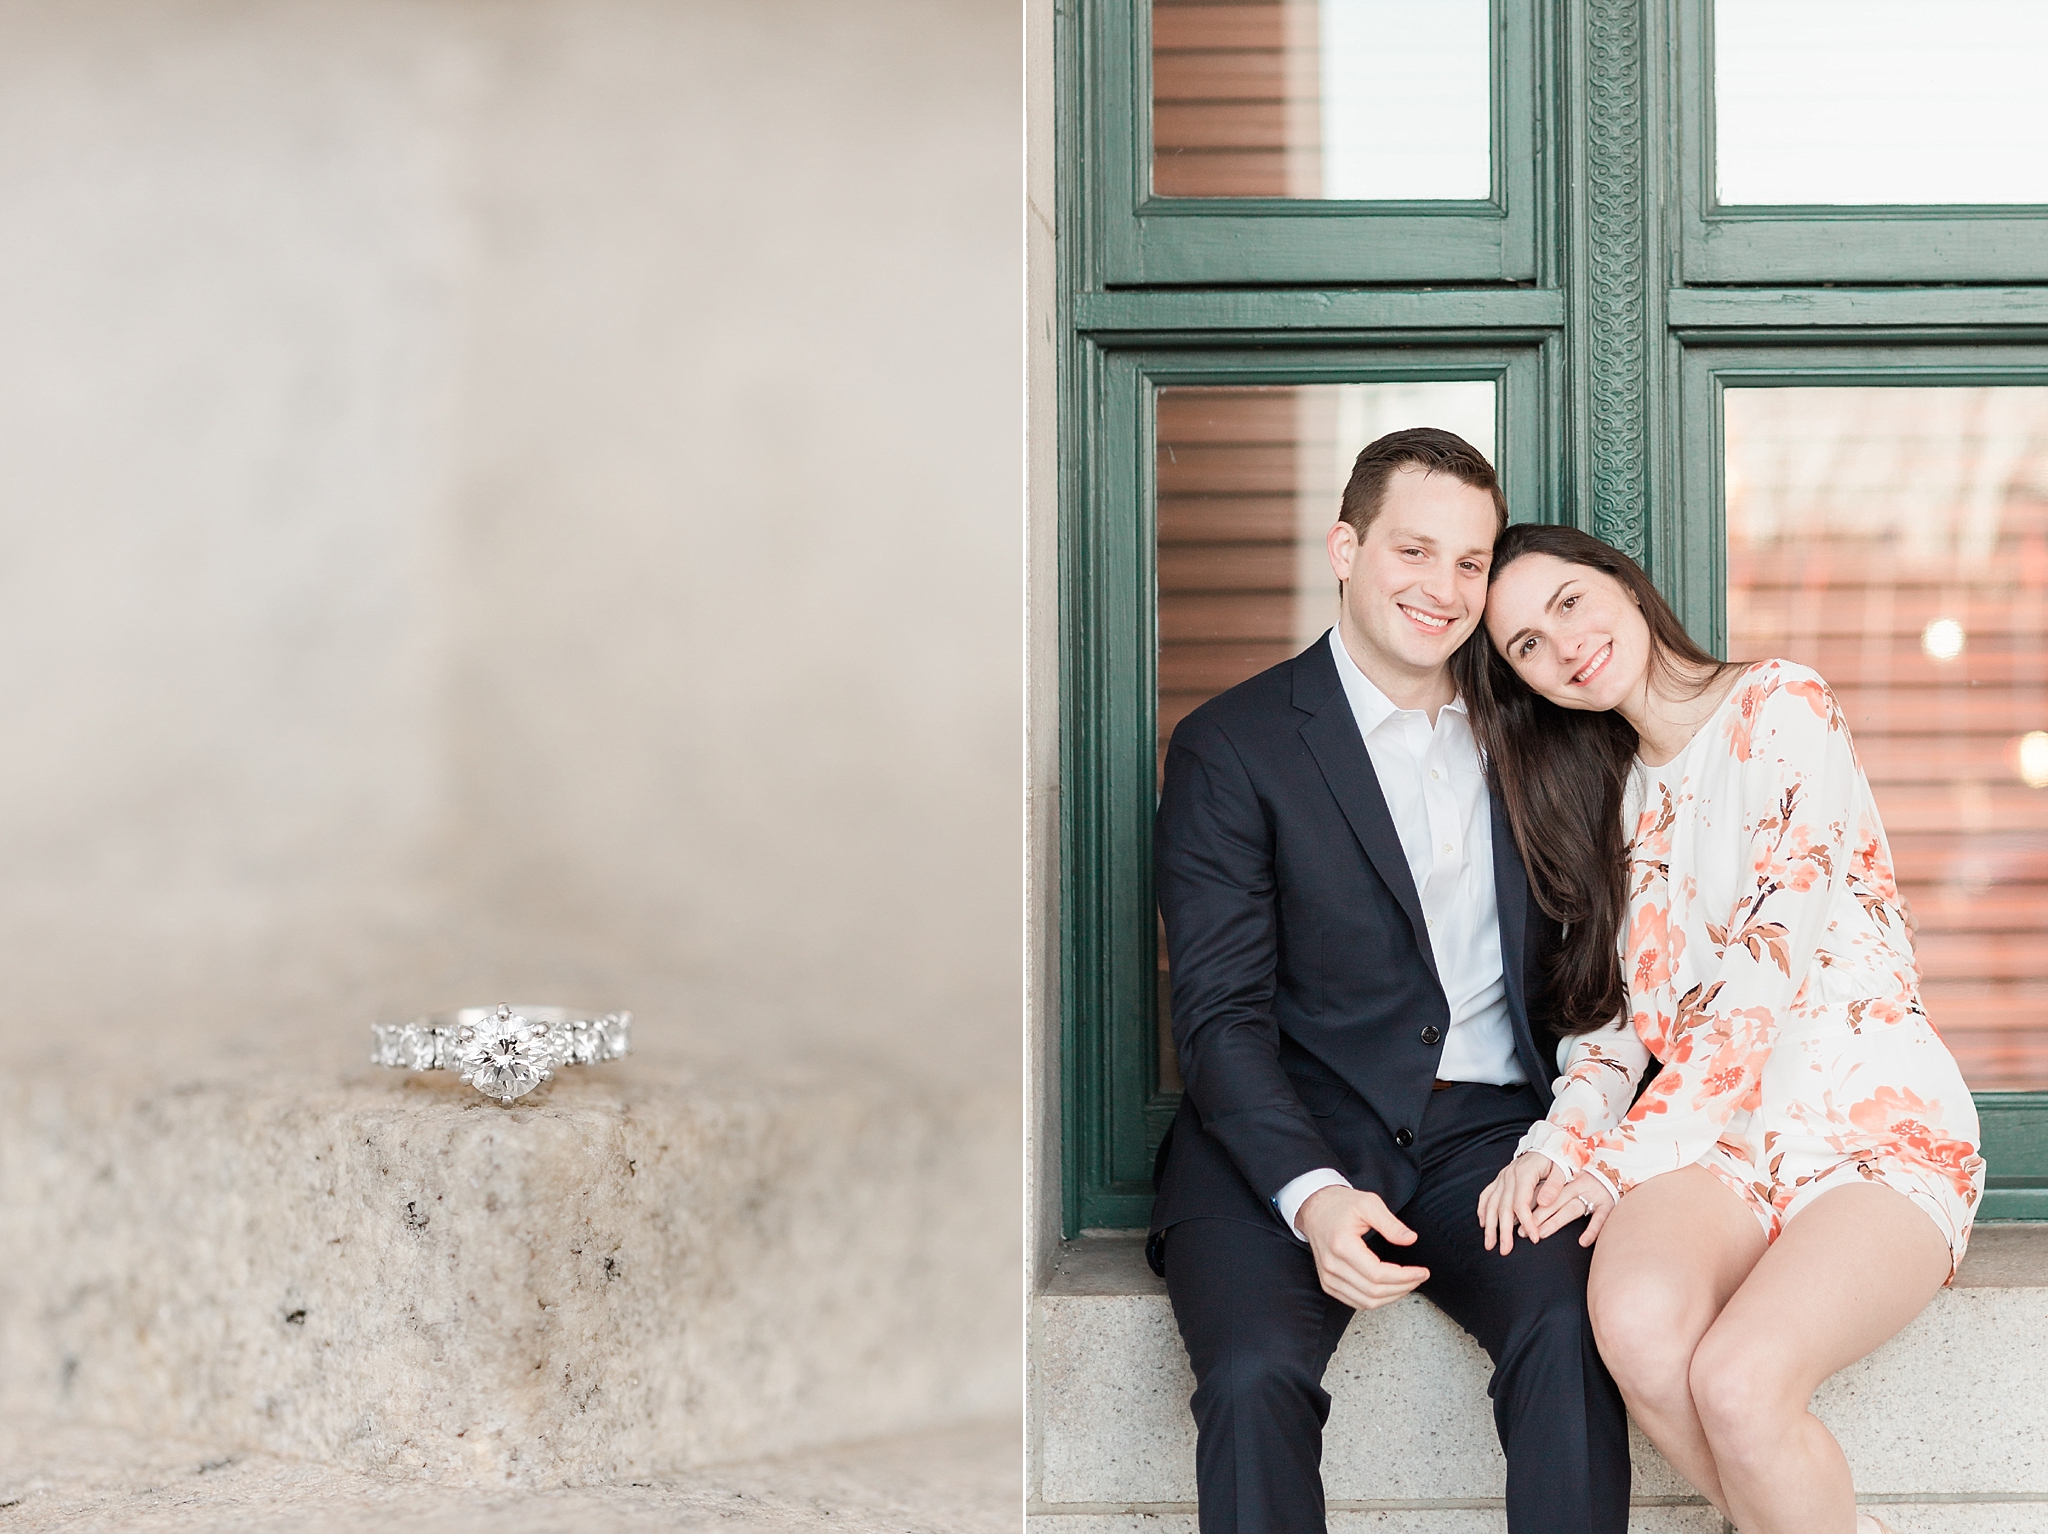 This romantic spring engagement session at Union Station in Washington, DC is photographed by fine art photographer, Alicia Lacey.